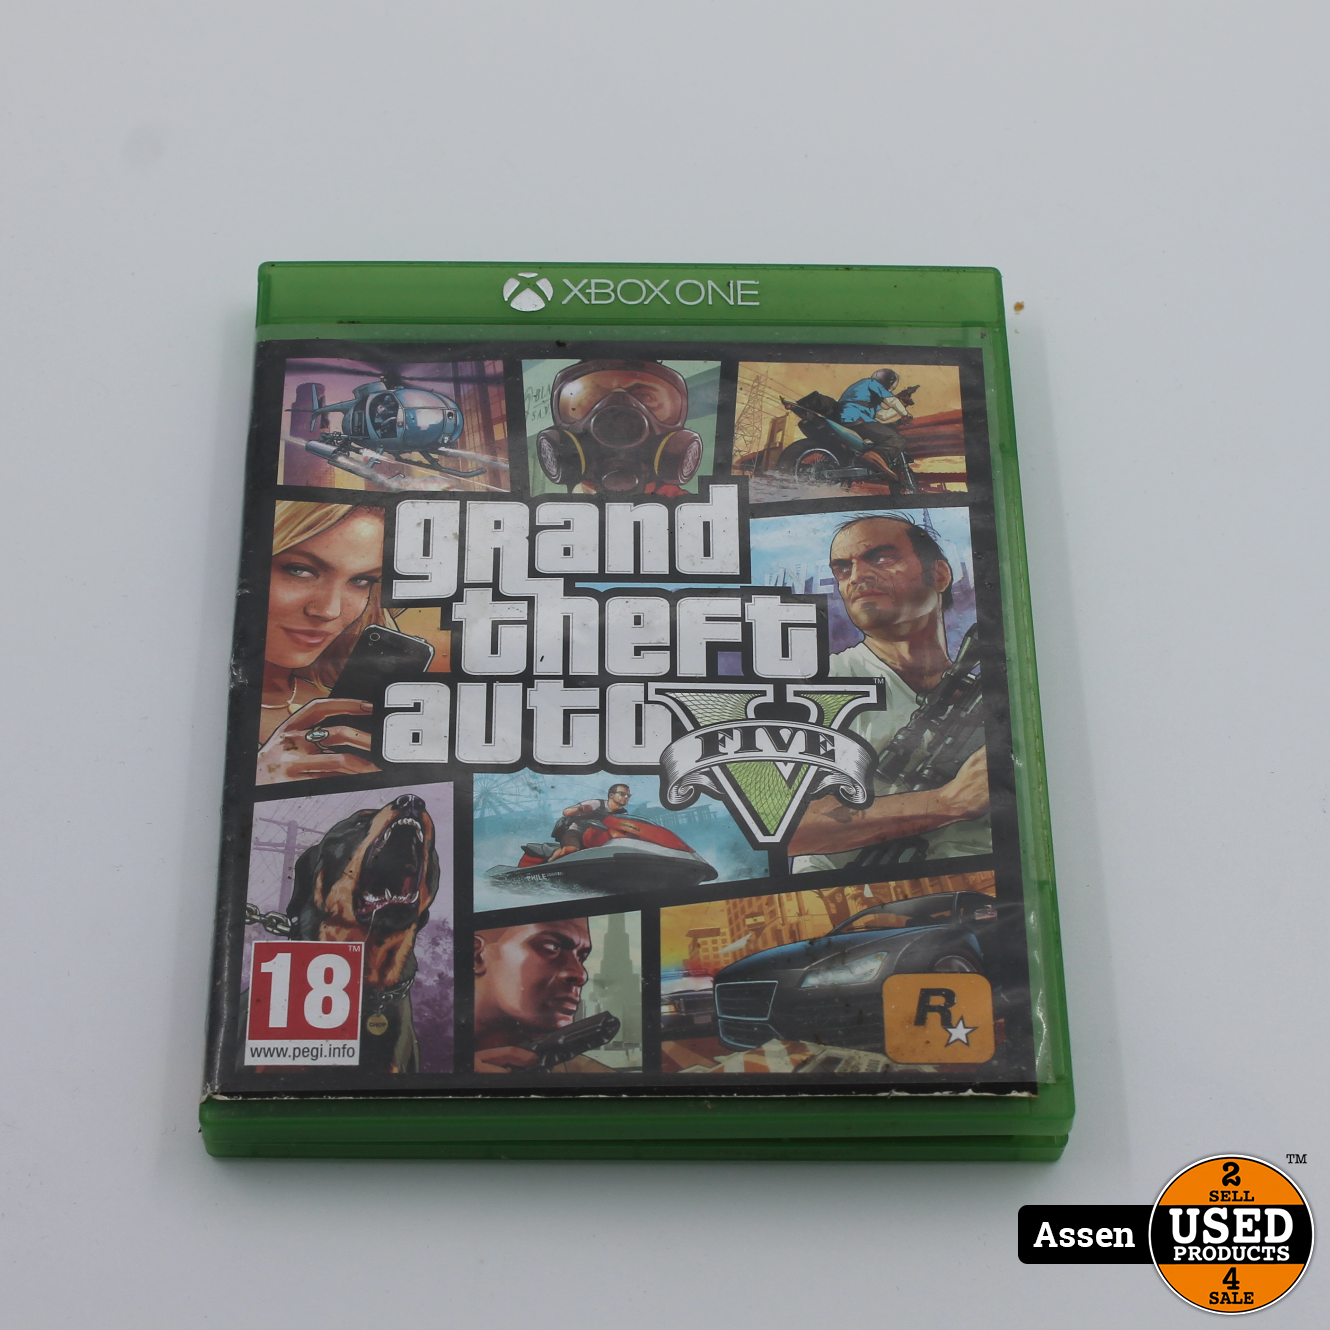 Microprocessor overzee schildpad Grand Theft Auto V Xbox One Game - Used Products Assen